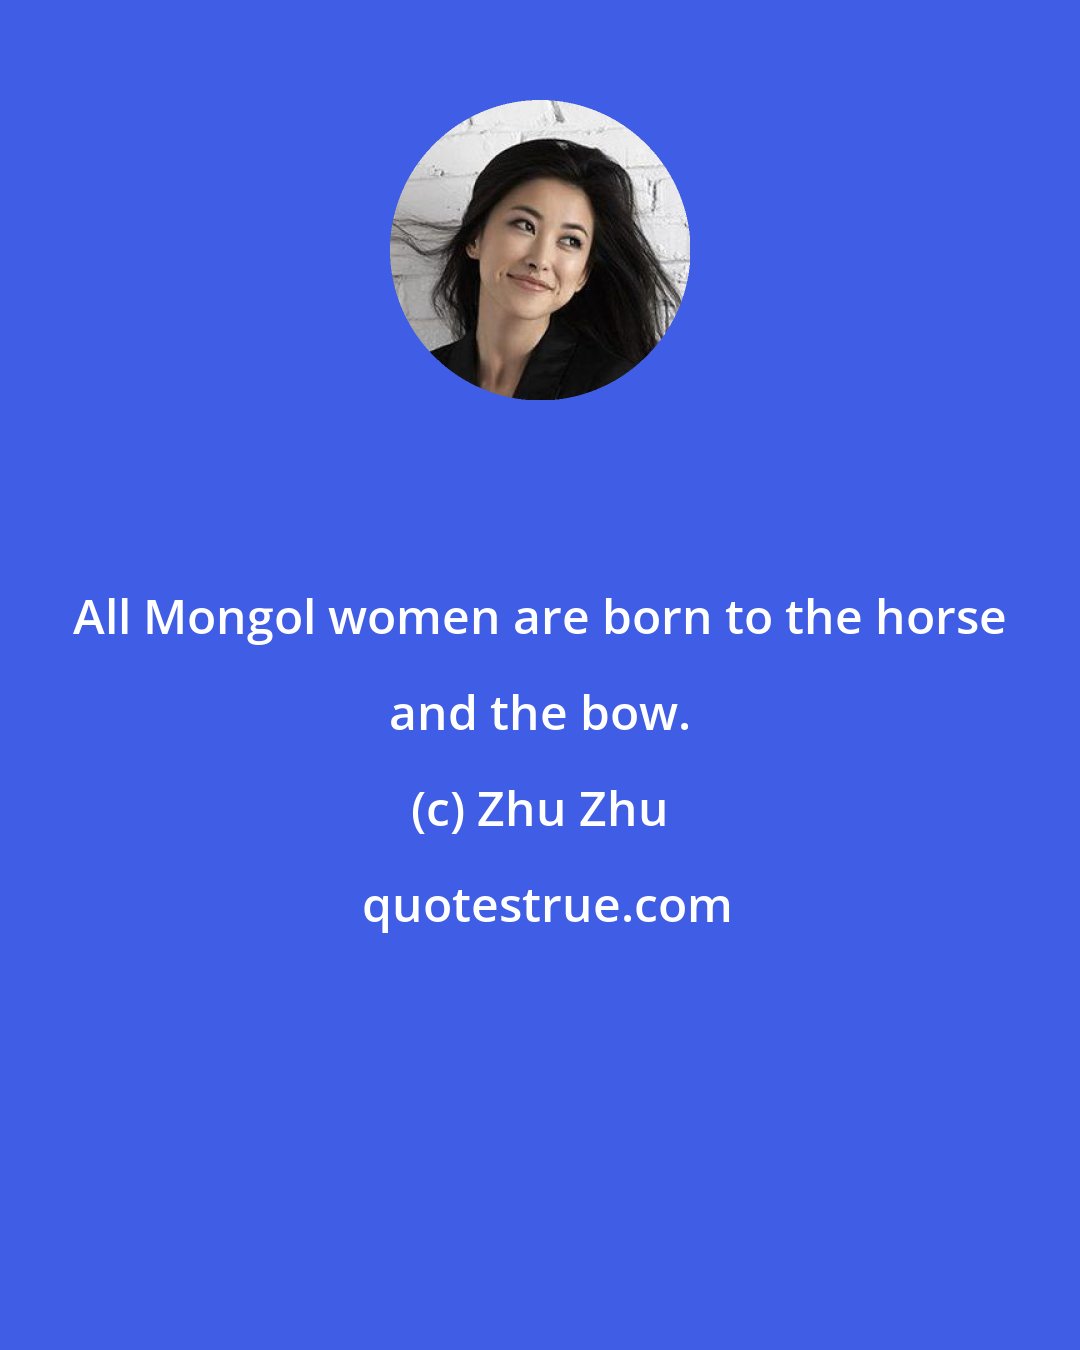 Zhu Zhu: All Mongol women are born to the horse and the bow.